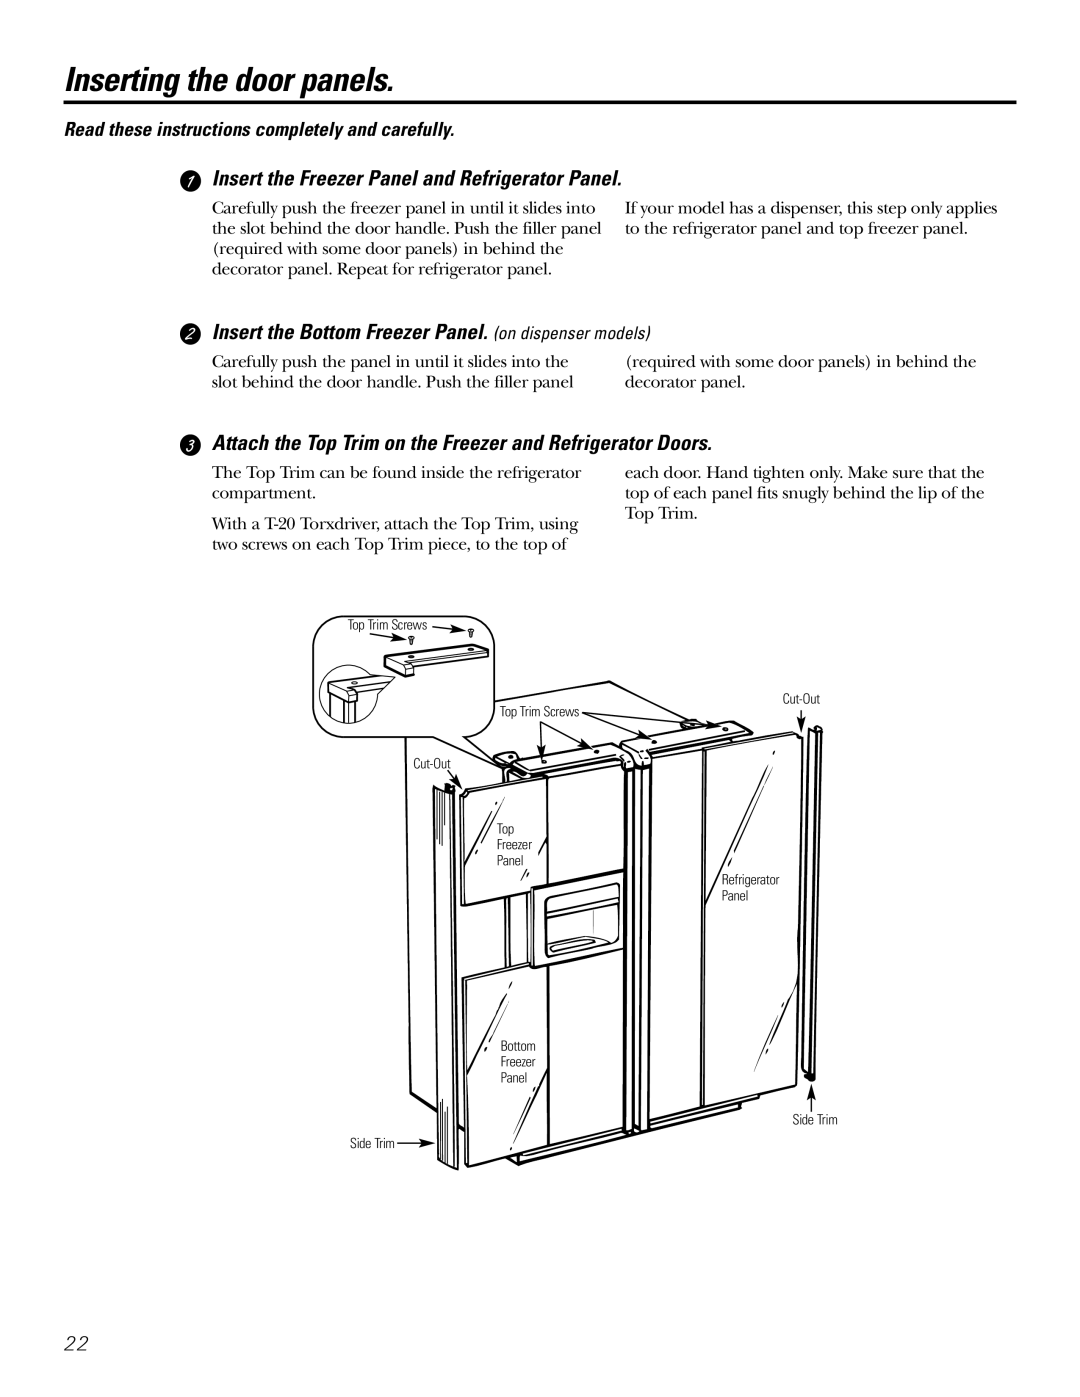 Hotpoint 23 operating instructions Inserting the door panels, Insert the Freezer Panel and Refrigerator Panel 